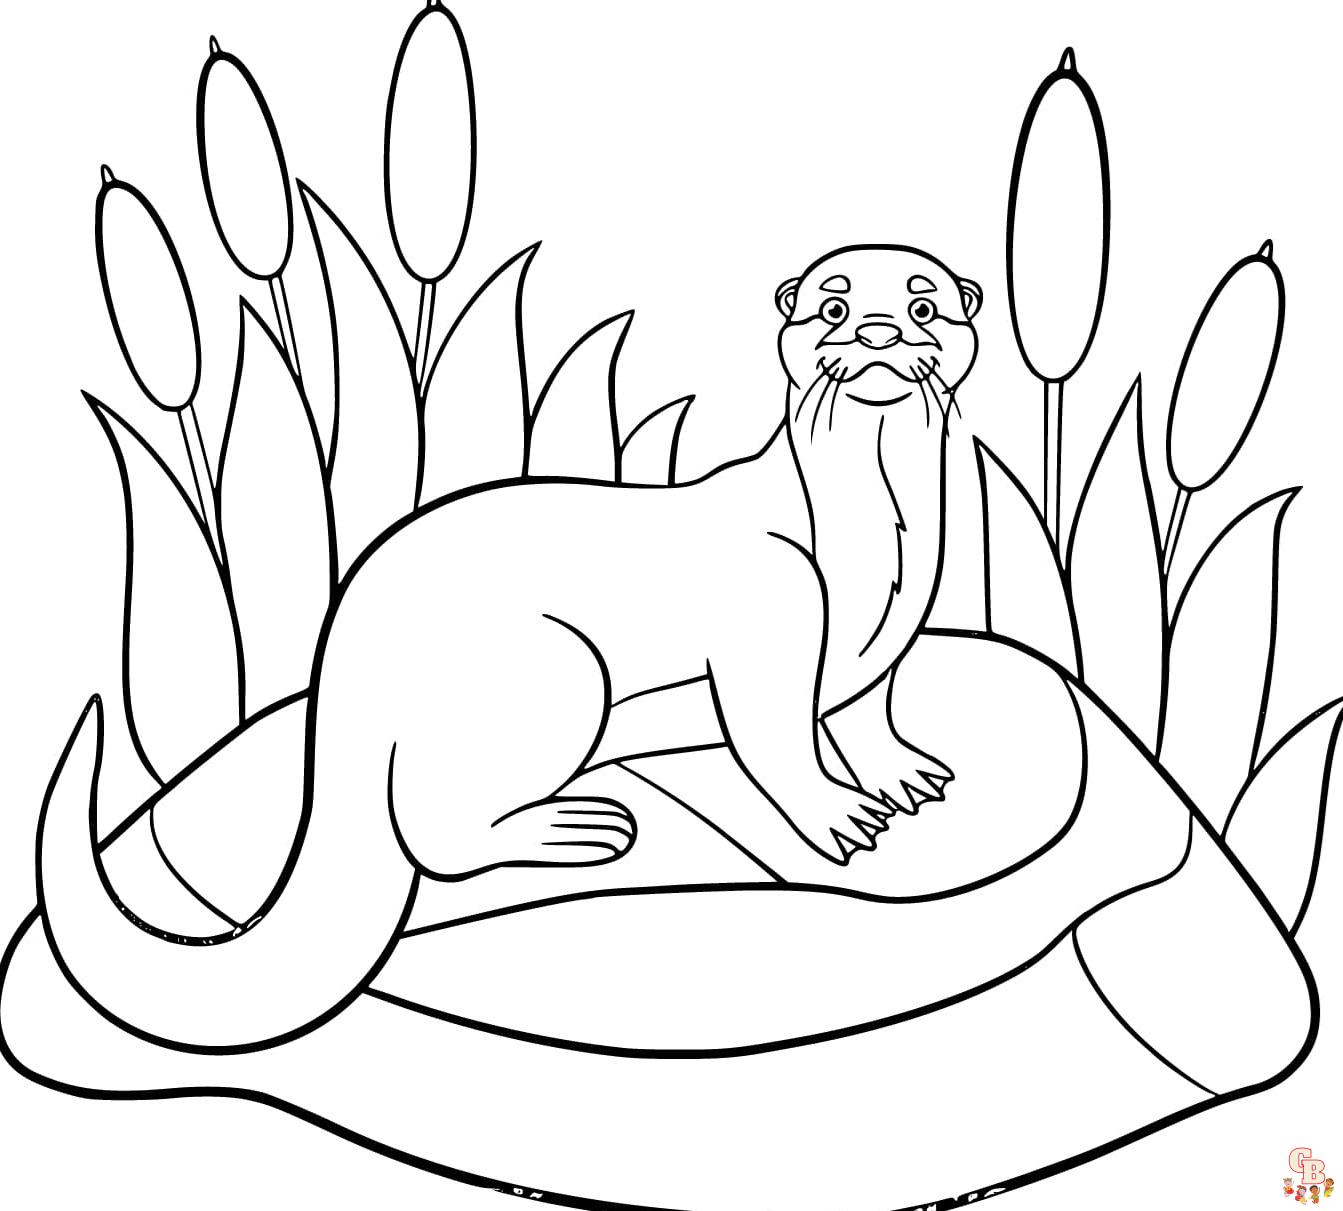 Printable Sea Otter Coloring Pages Free For Kids And Adults